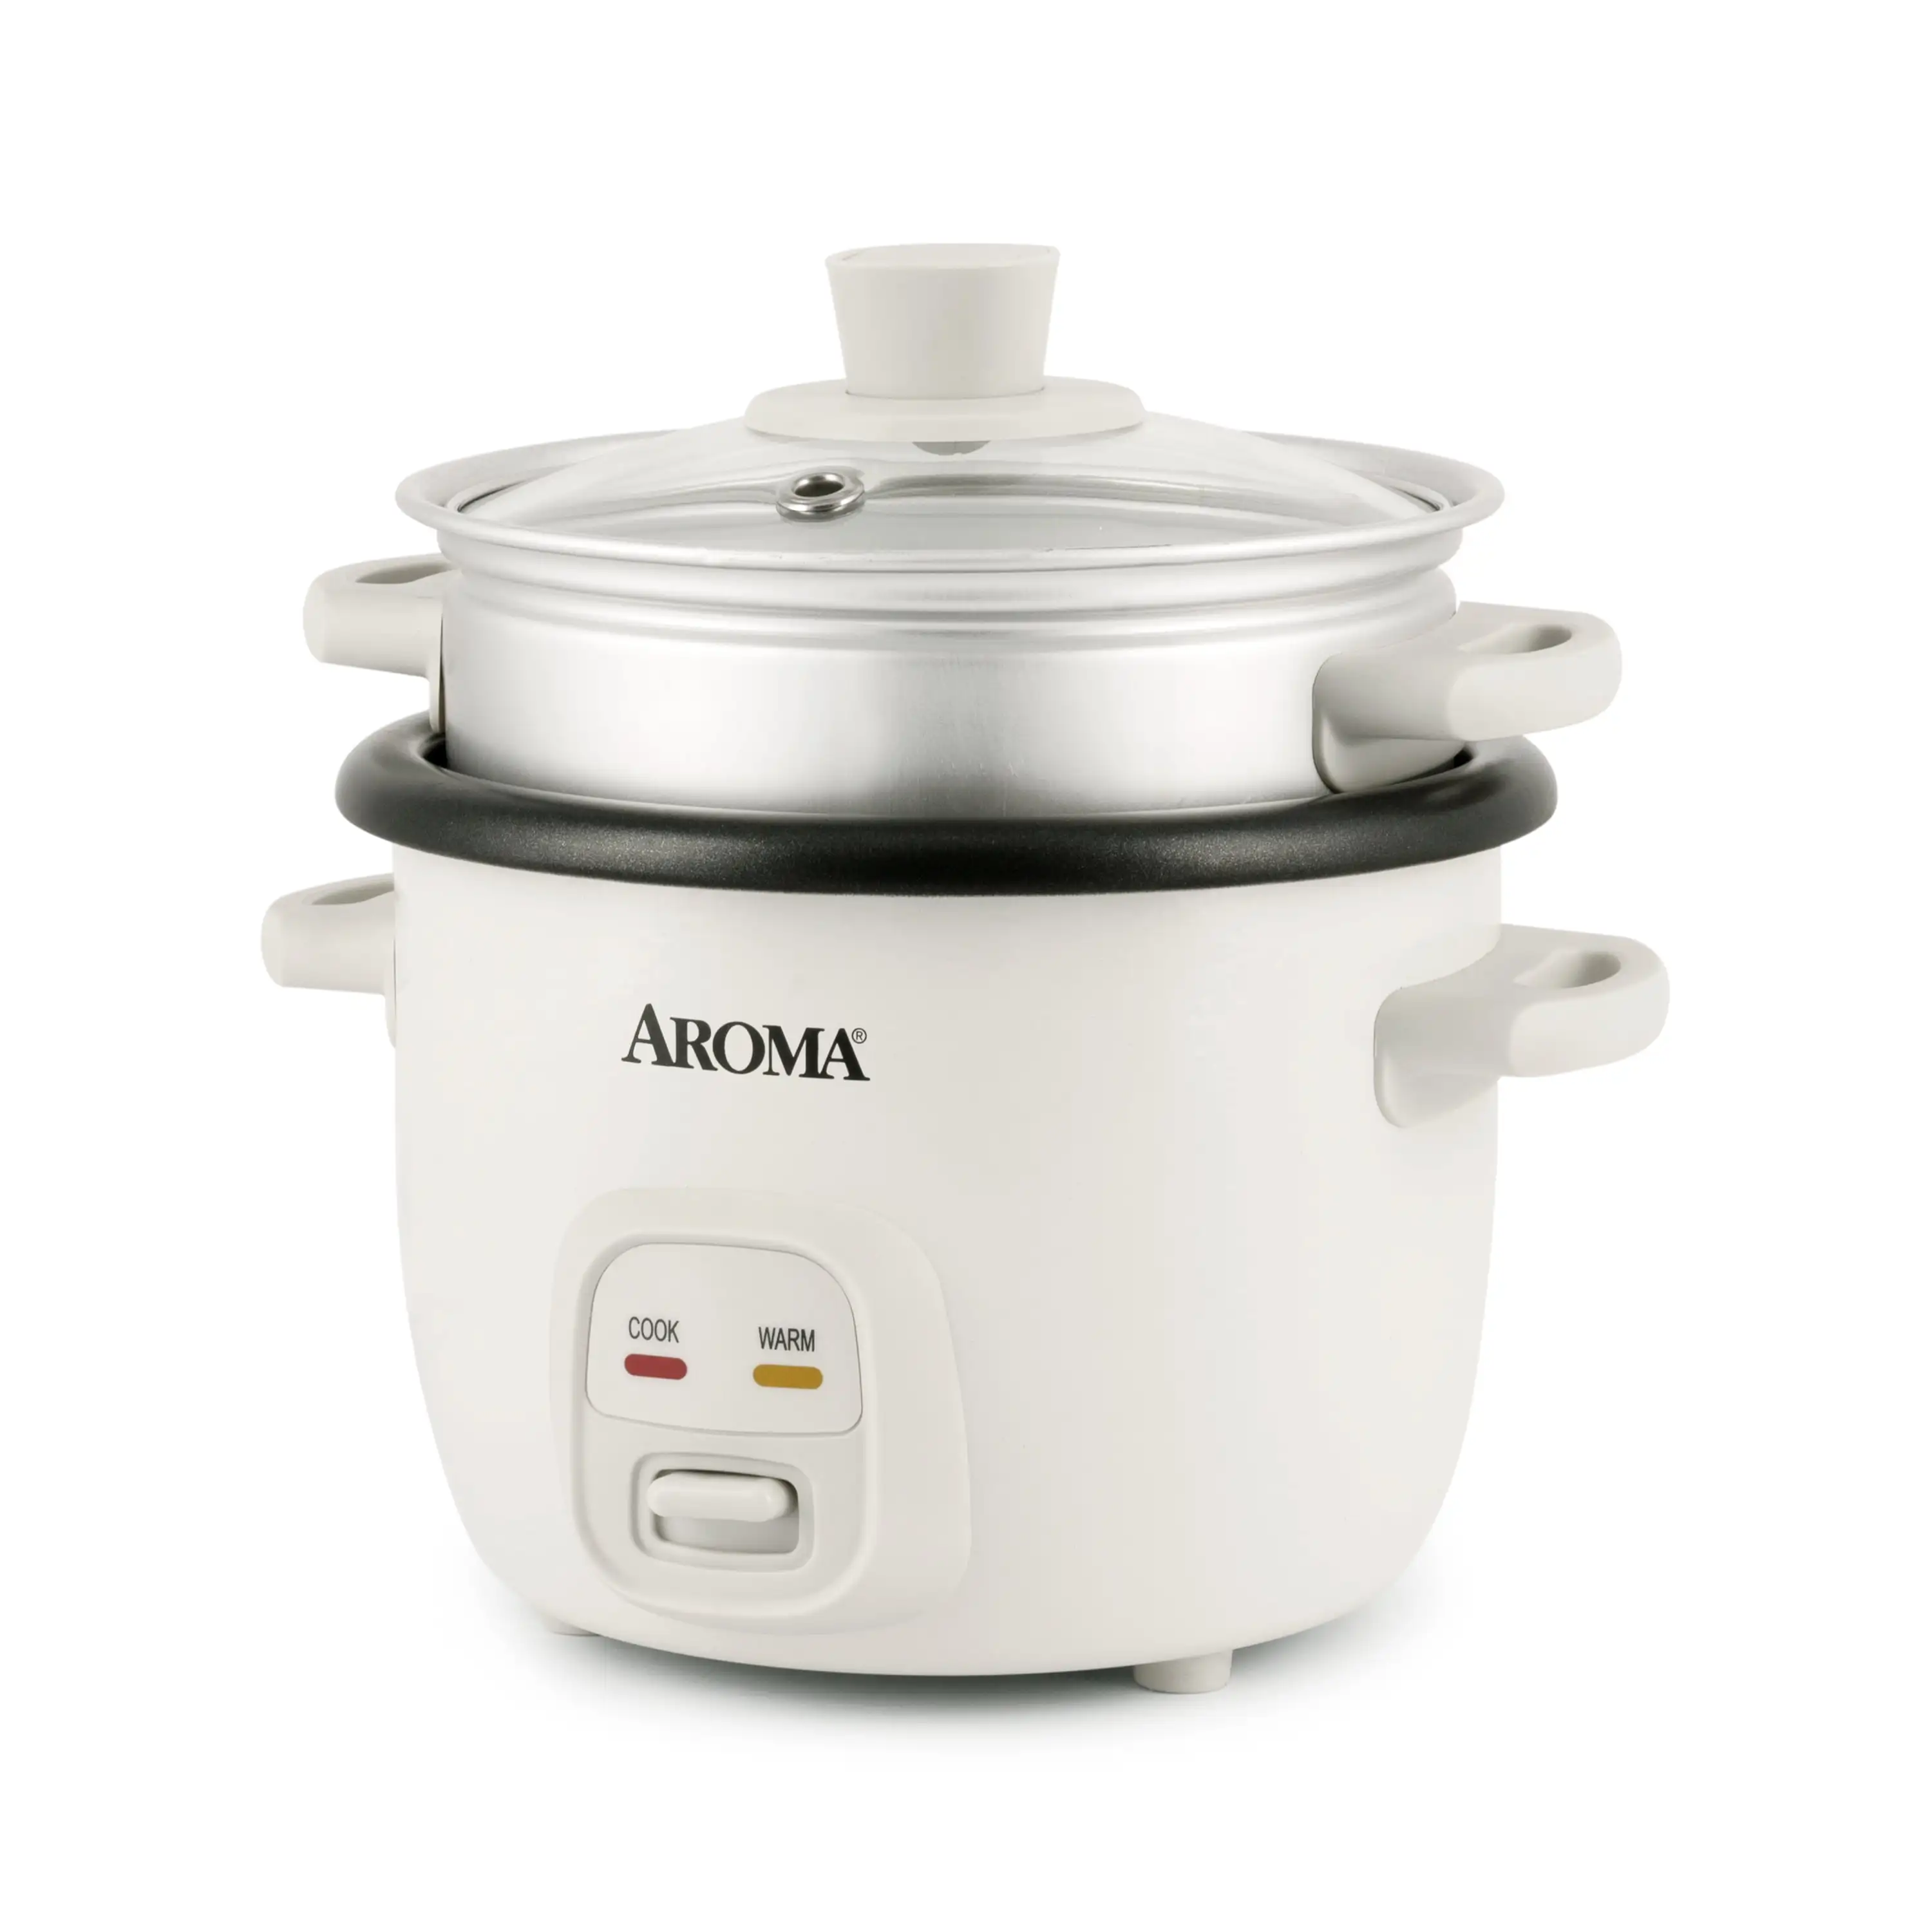 

4 Cup Rice Cooker/Steamer,Removable Nonstick Cooking Pot, Easy One-touch Operation, Glass Lid with Steam Vent